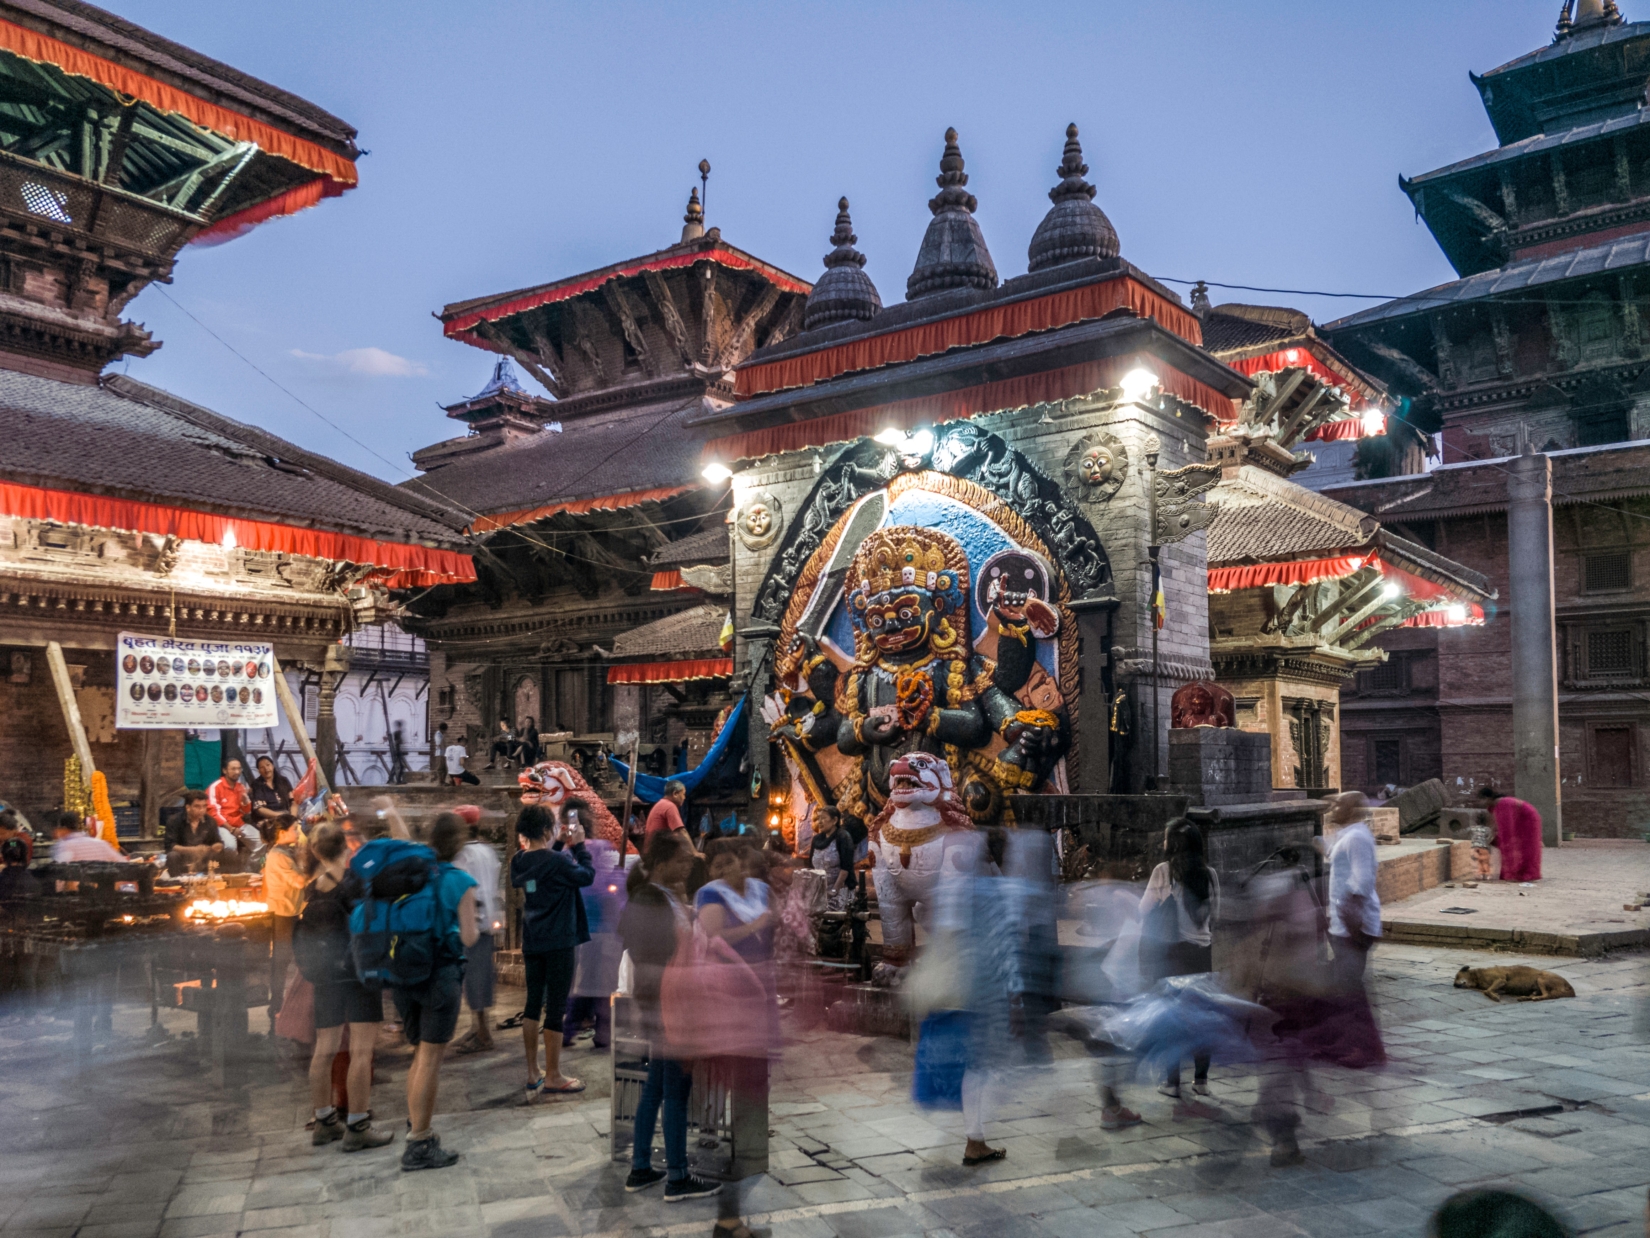 A photograph of a religious shrine in Kathmandu, with visitors and tourists surrounding it